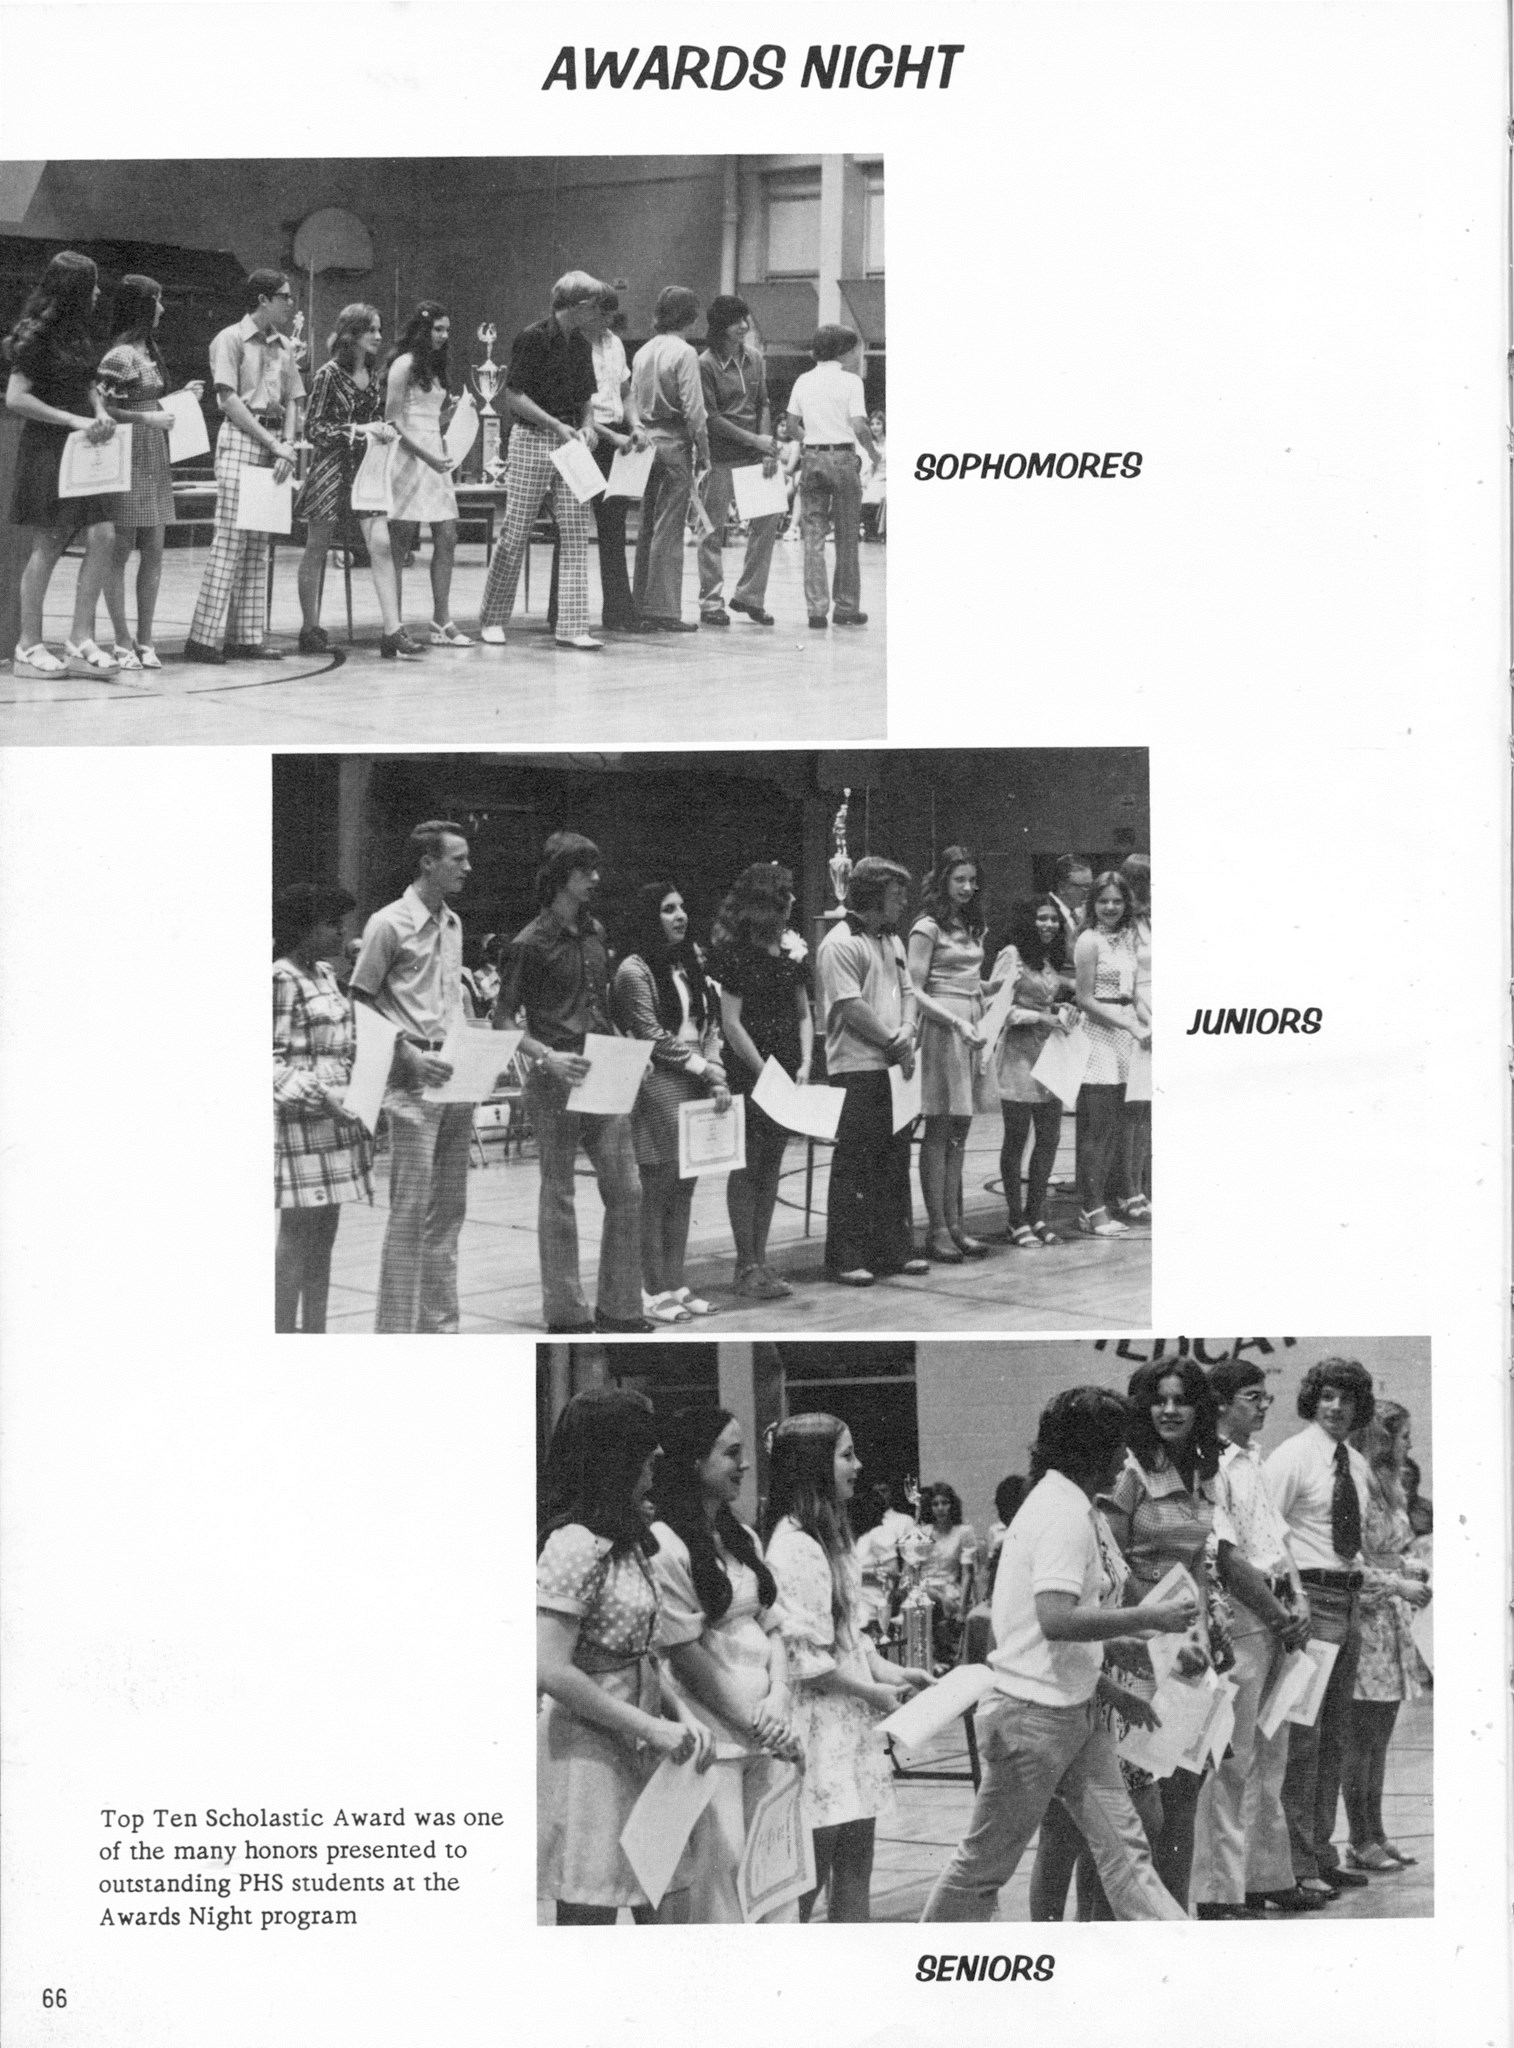 ../../../Images/Large/1975/Arclight-1975-pg0066.jpg